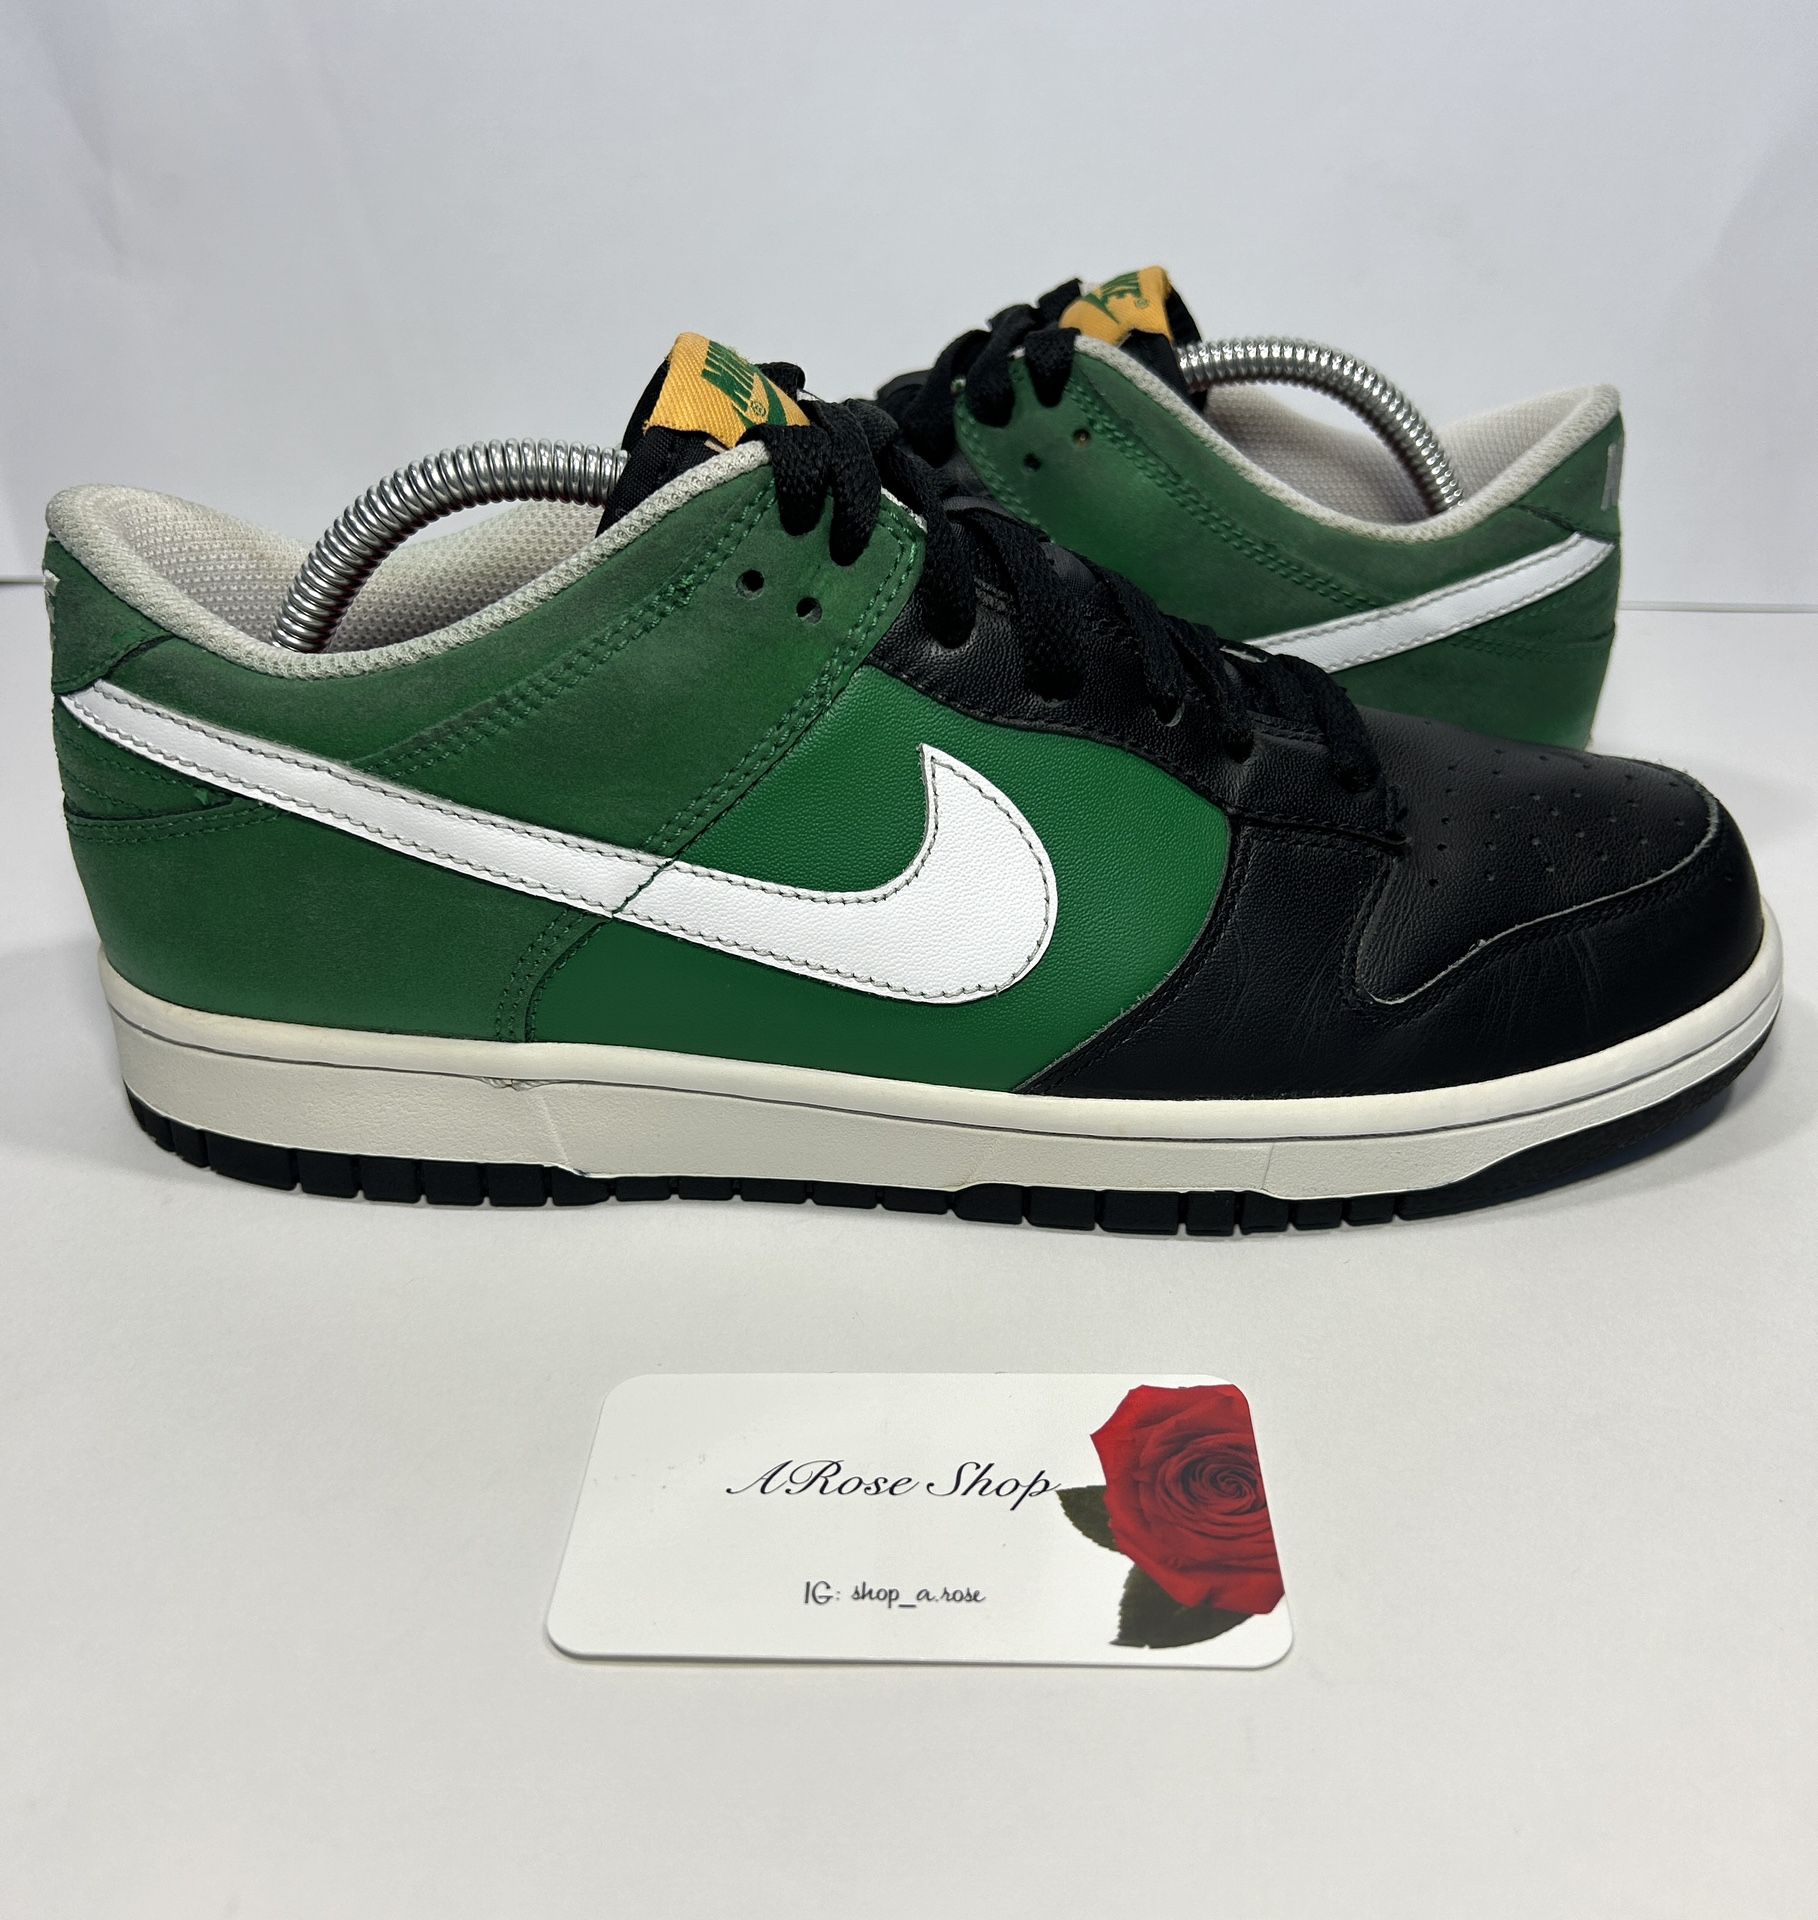 Nike Dunk Low CL ‘Green Black’ (318020 311) Shoes Size: 9 M